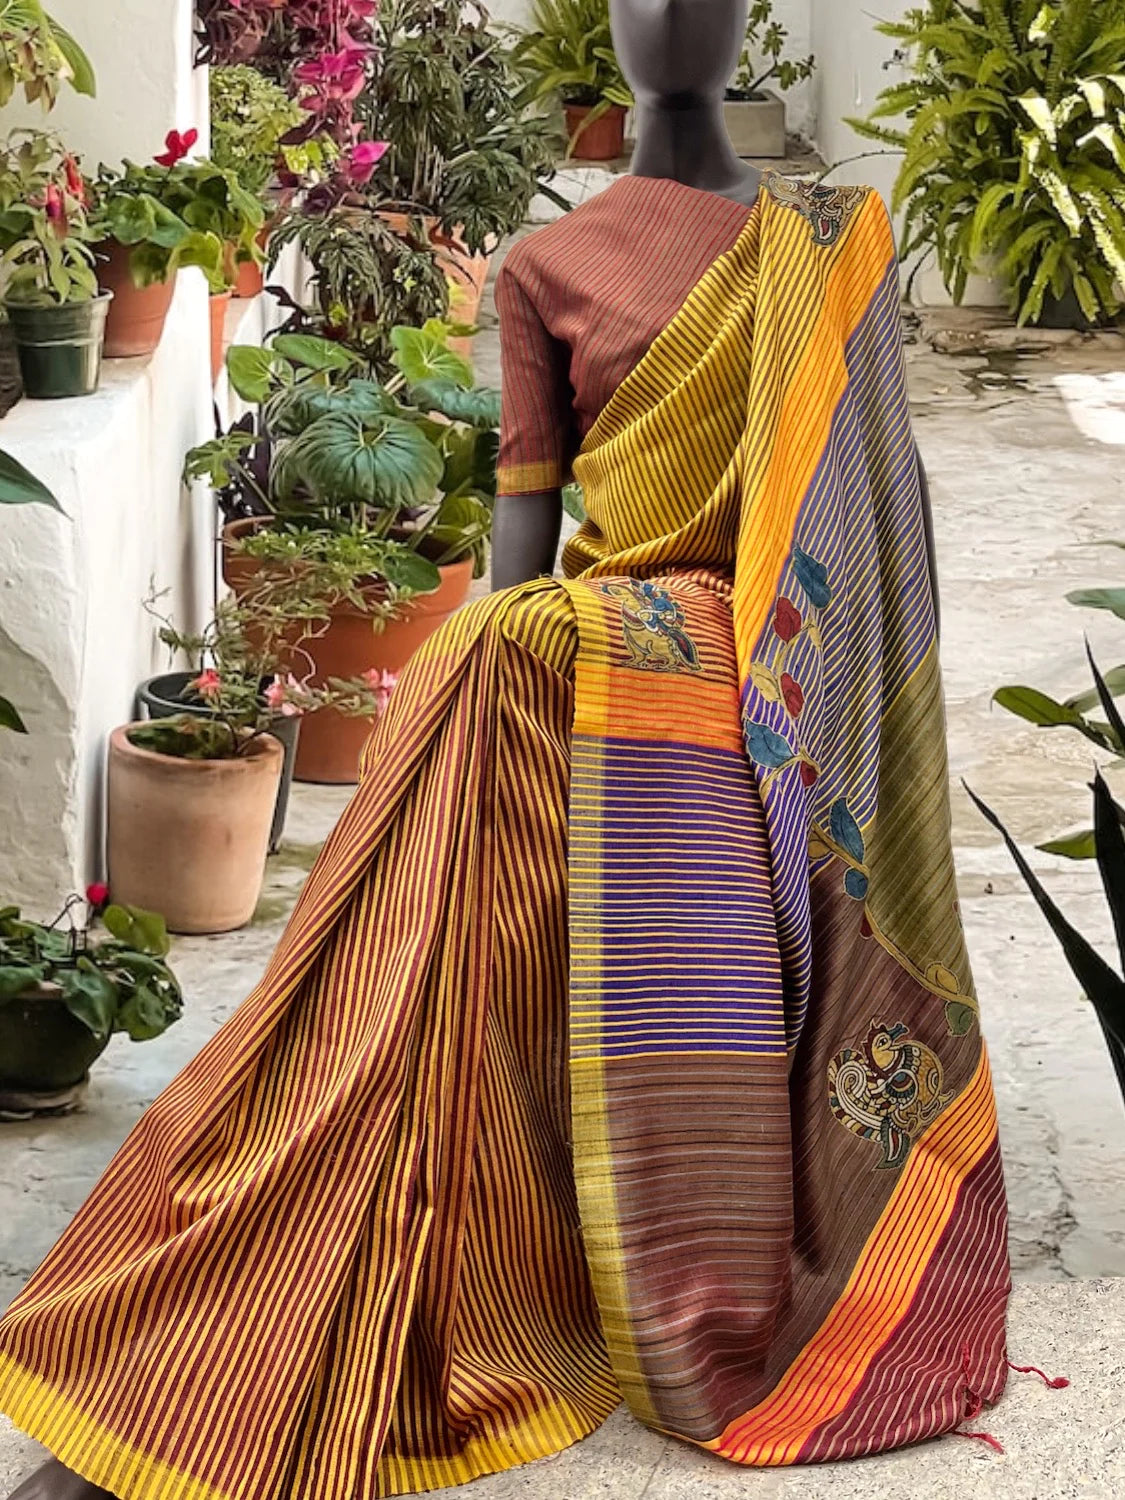 Handloom Sarees: A Testament to Indian Heritage and Economic Empowerment